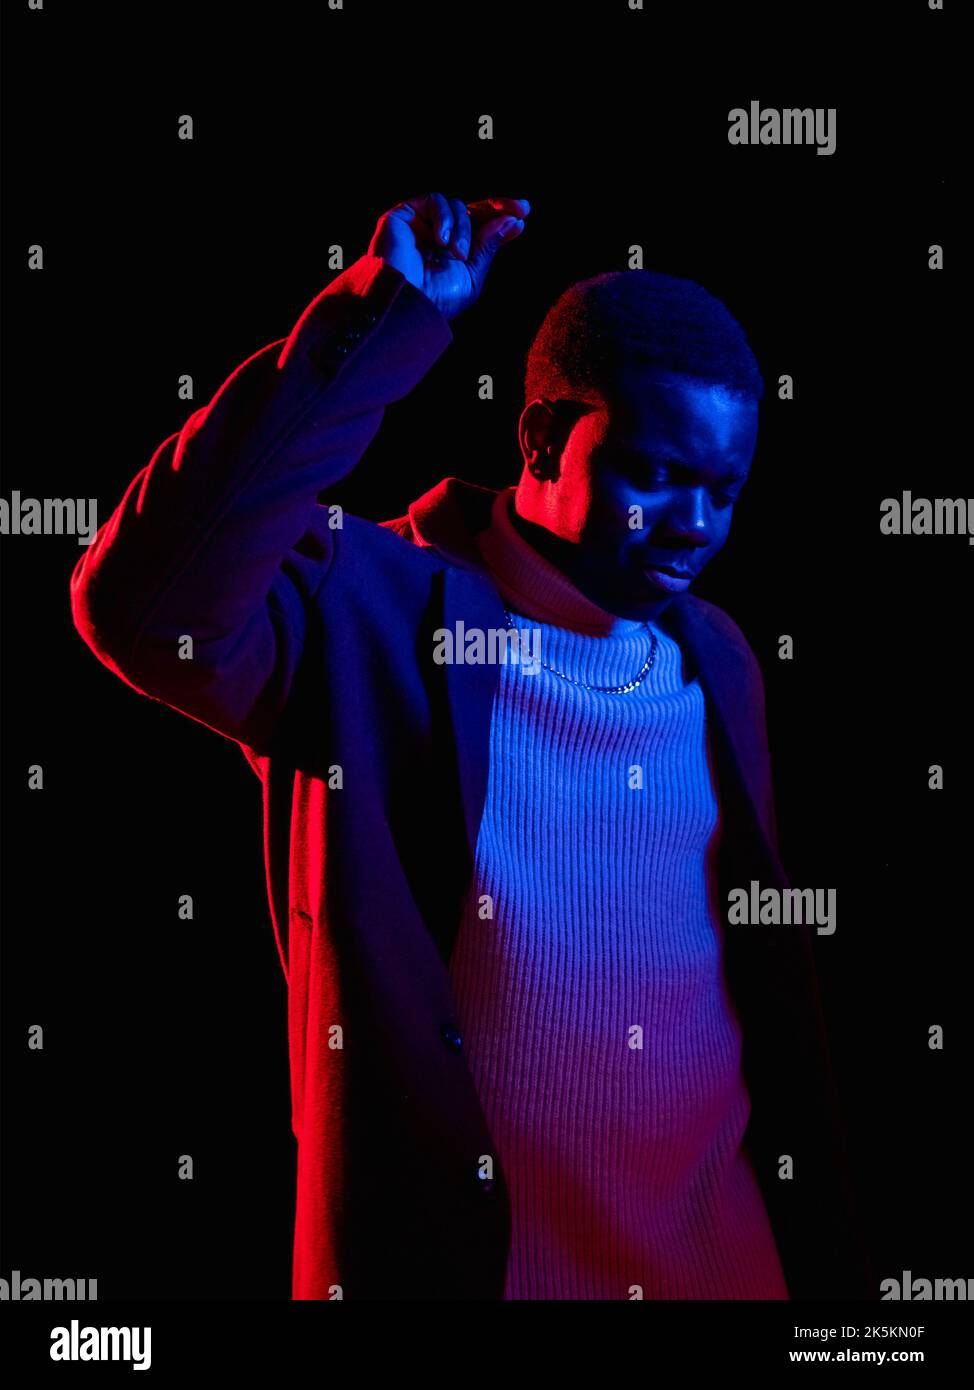 dancing man neon party night life carefree weekend Stock Photo